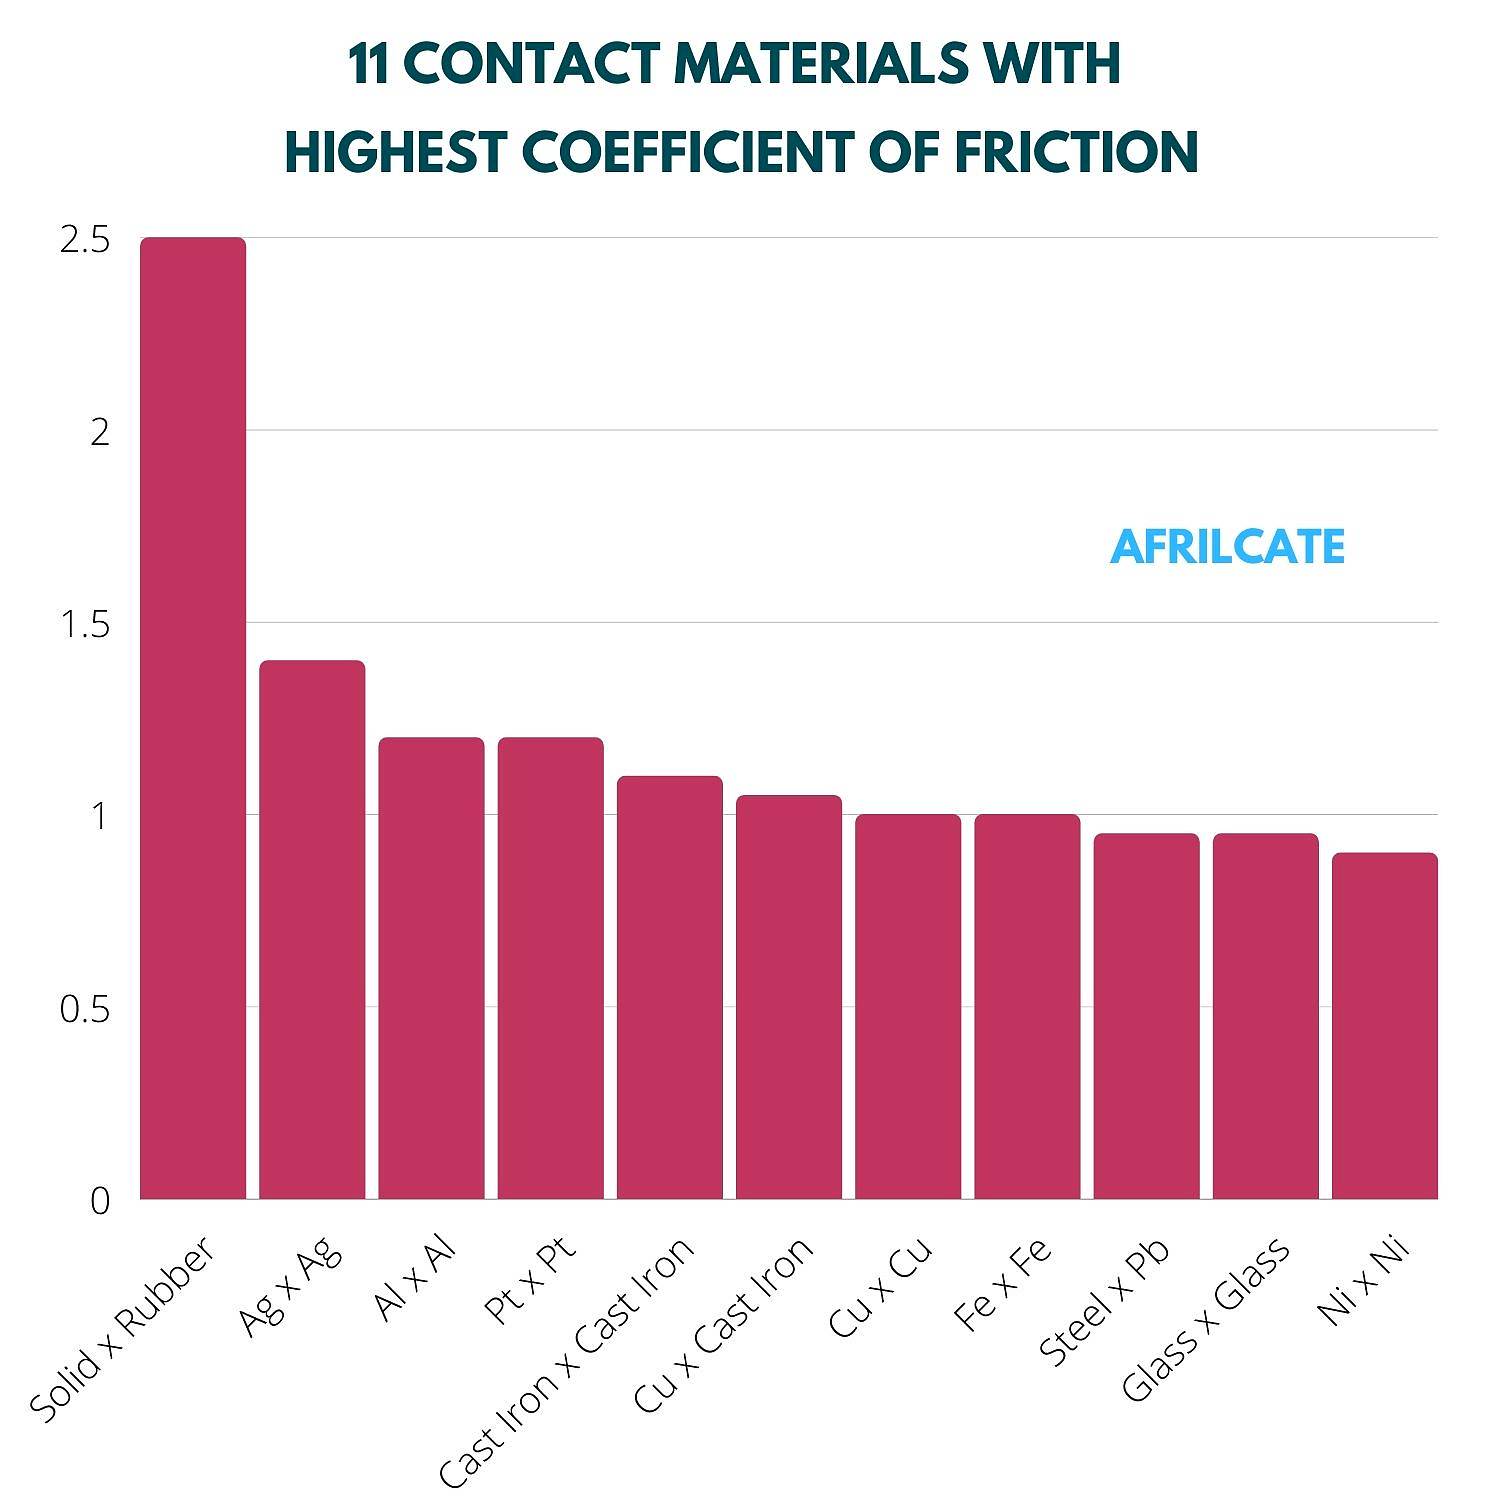 11 Contact materials with the highest coefficient of friction